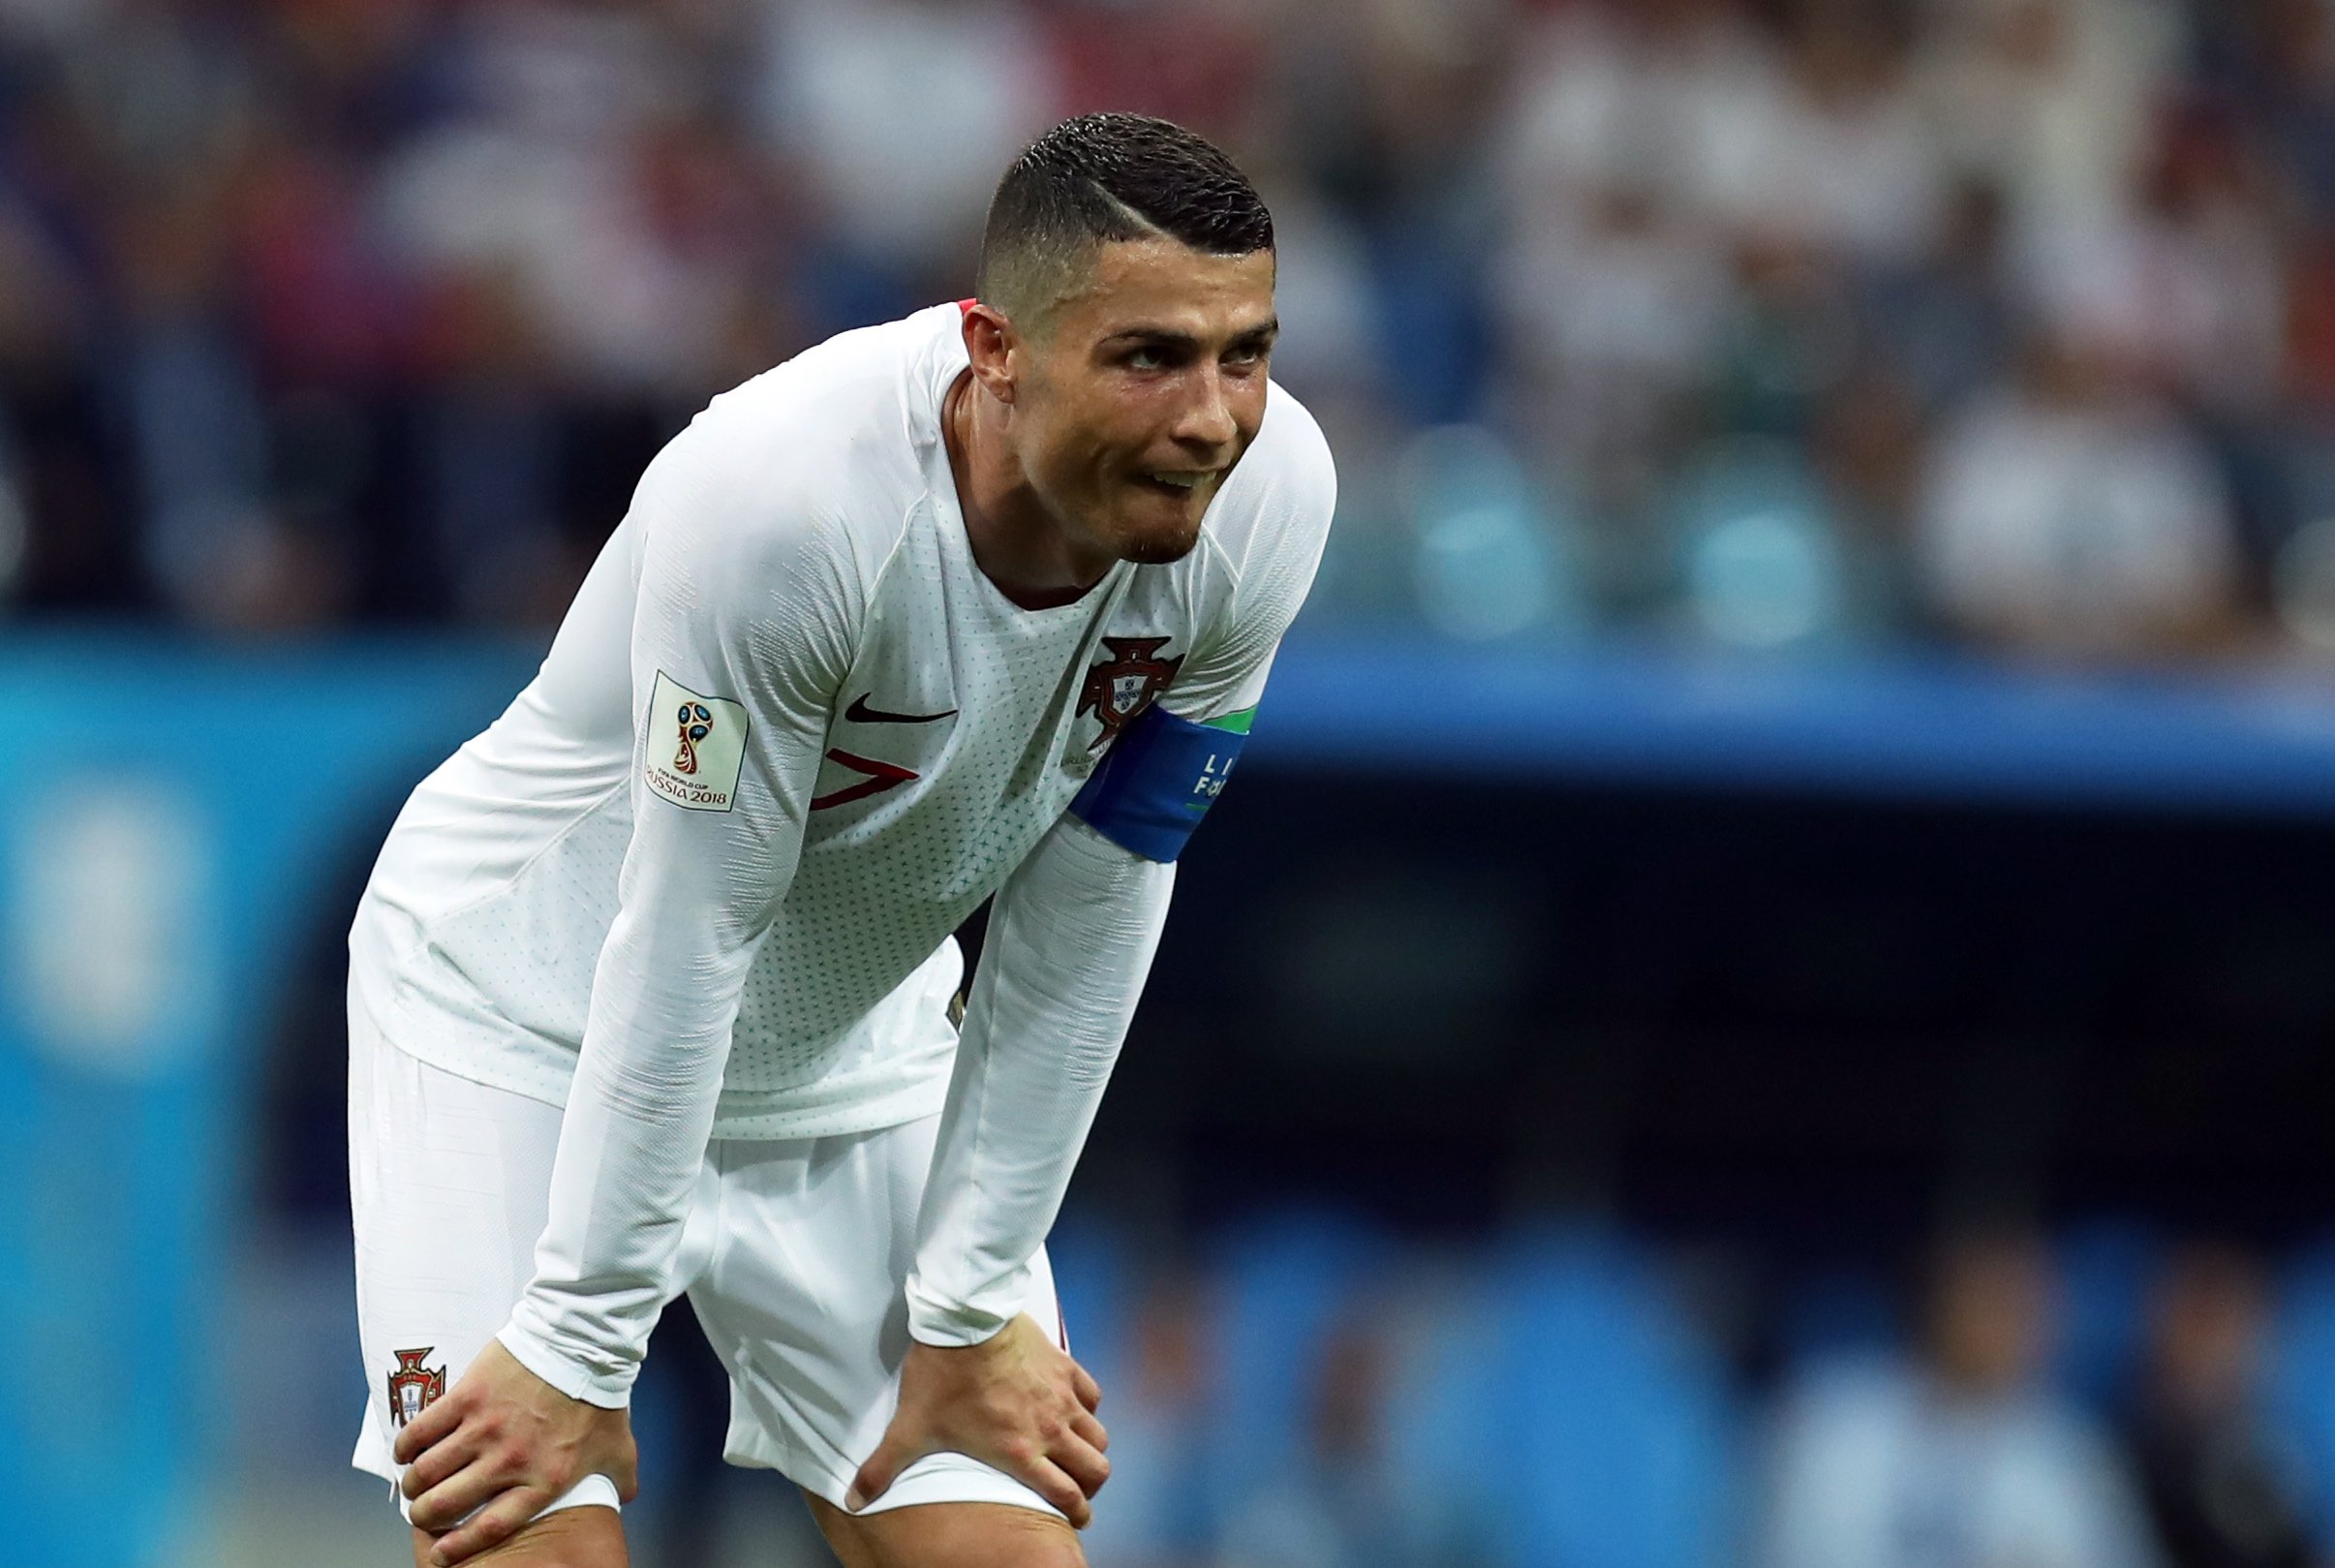 Cristiano Ronaldo not thinking about retirement after Portugal knocked out of World Cup